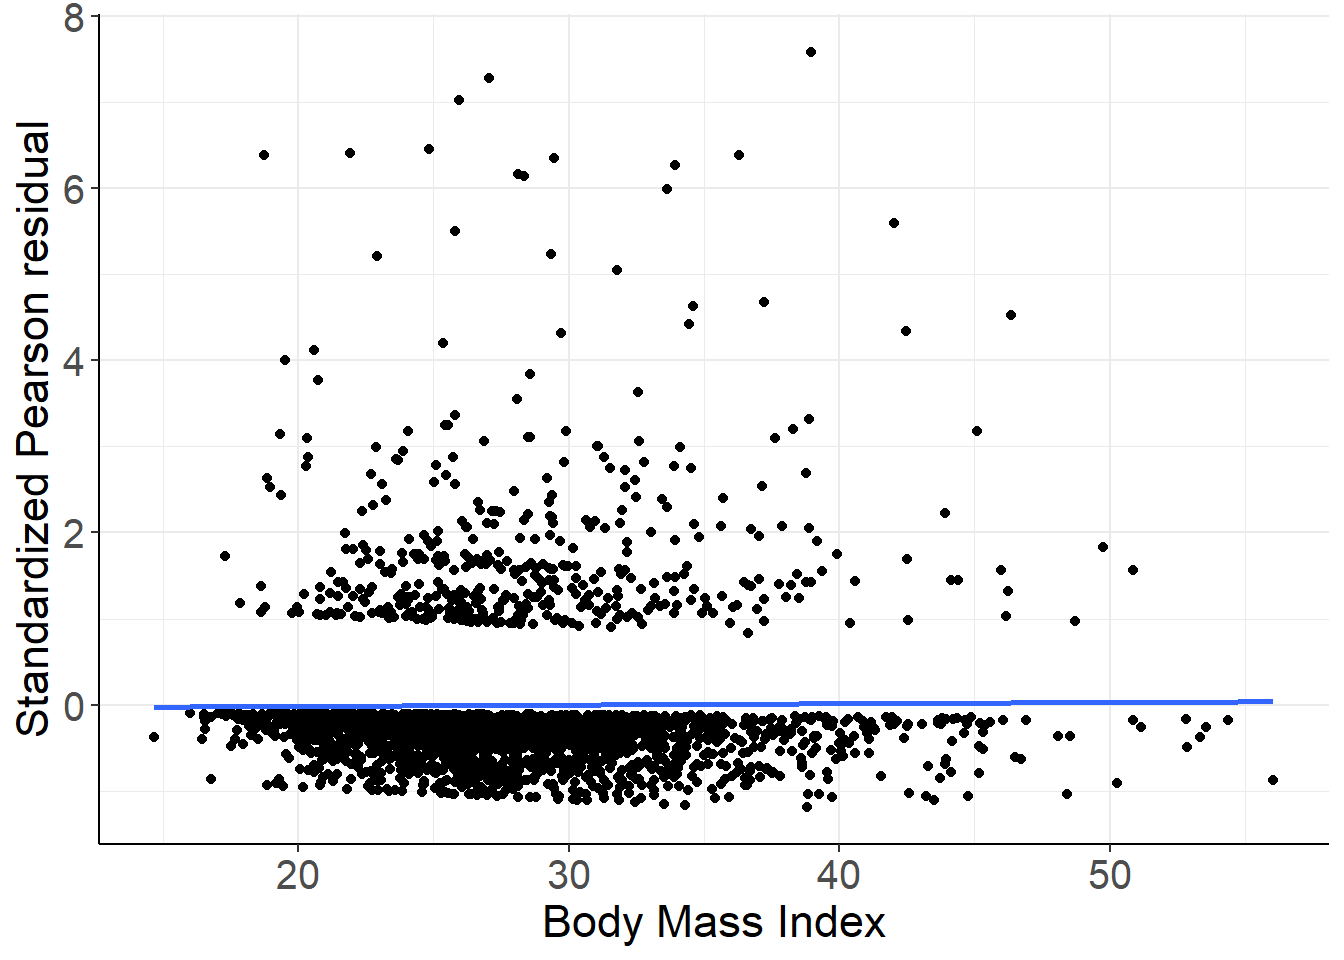 Standardized Pearson residuals vs. BMI. Logistic mdoel with **linear and quadratic age and BMI ** as covariates.